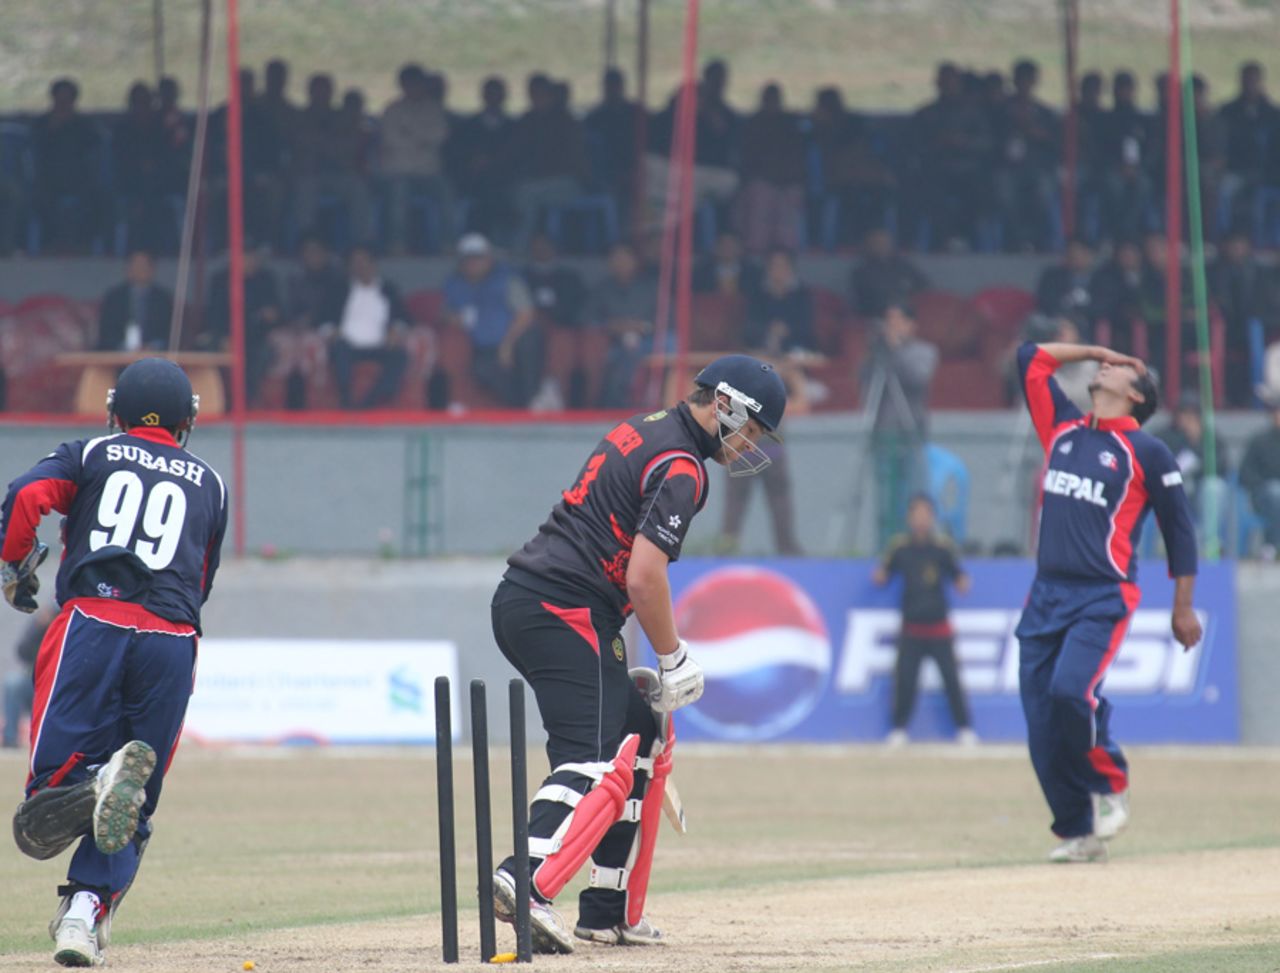 Courtney Kruger is bowled by Mahboob Alam during the ACC Twenty20 Cup 2011 match against Nepal played at Tribhuvan University Ground in Kathmandu on 3rd December 2011